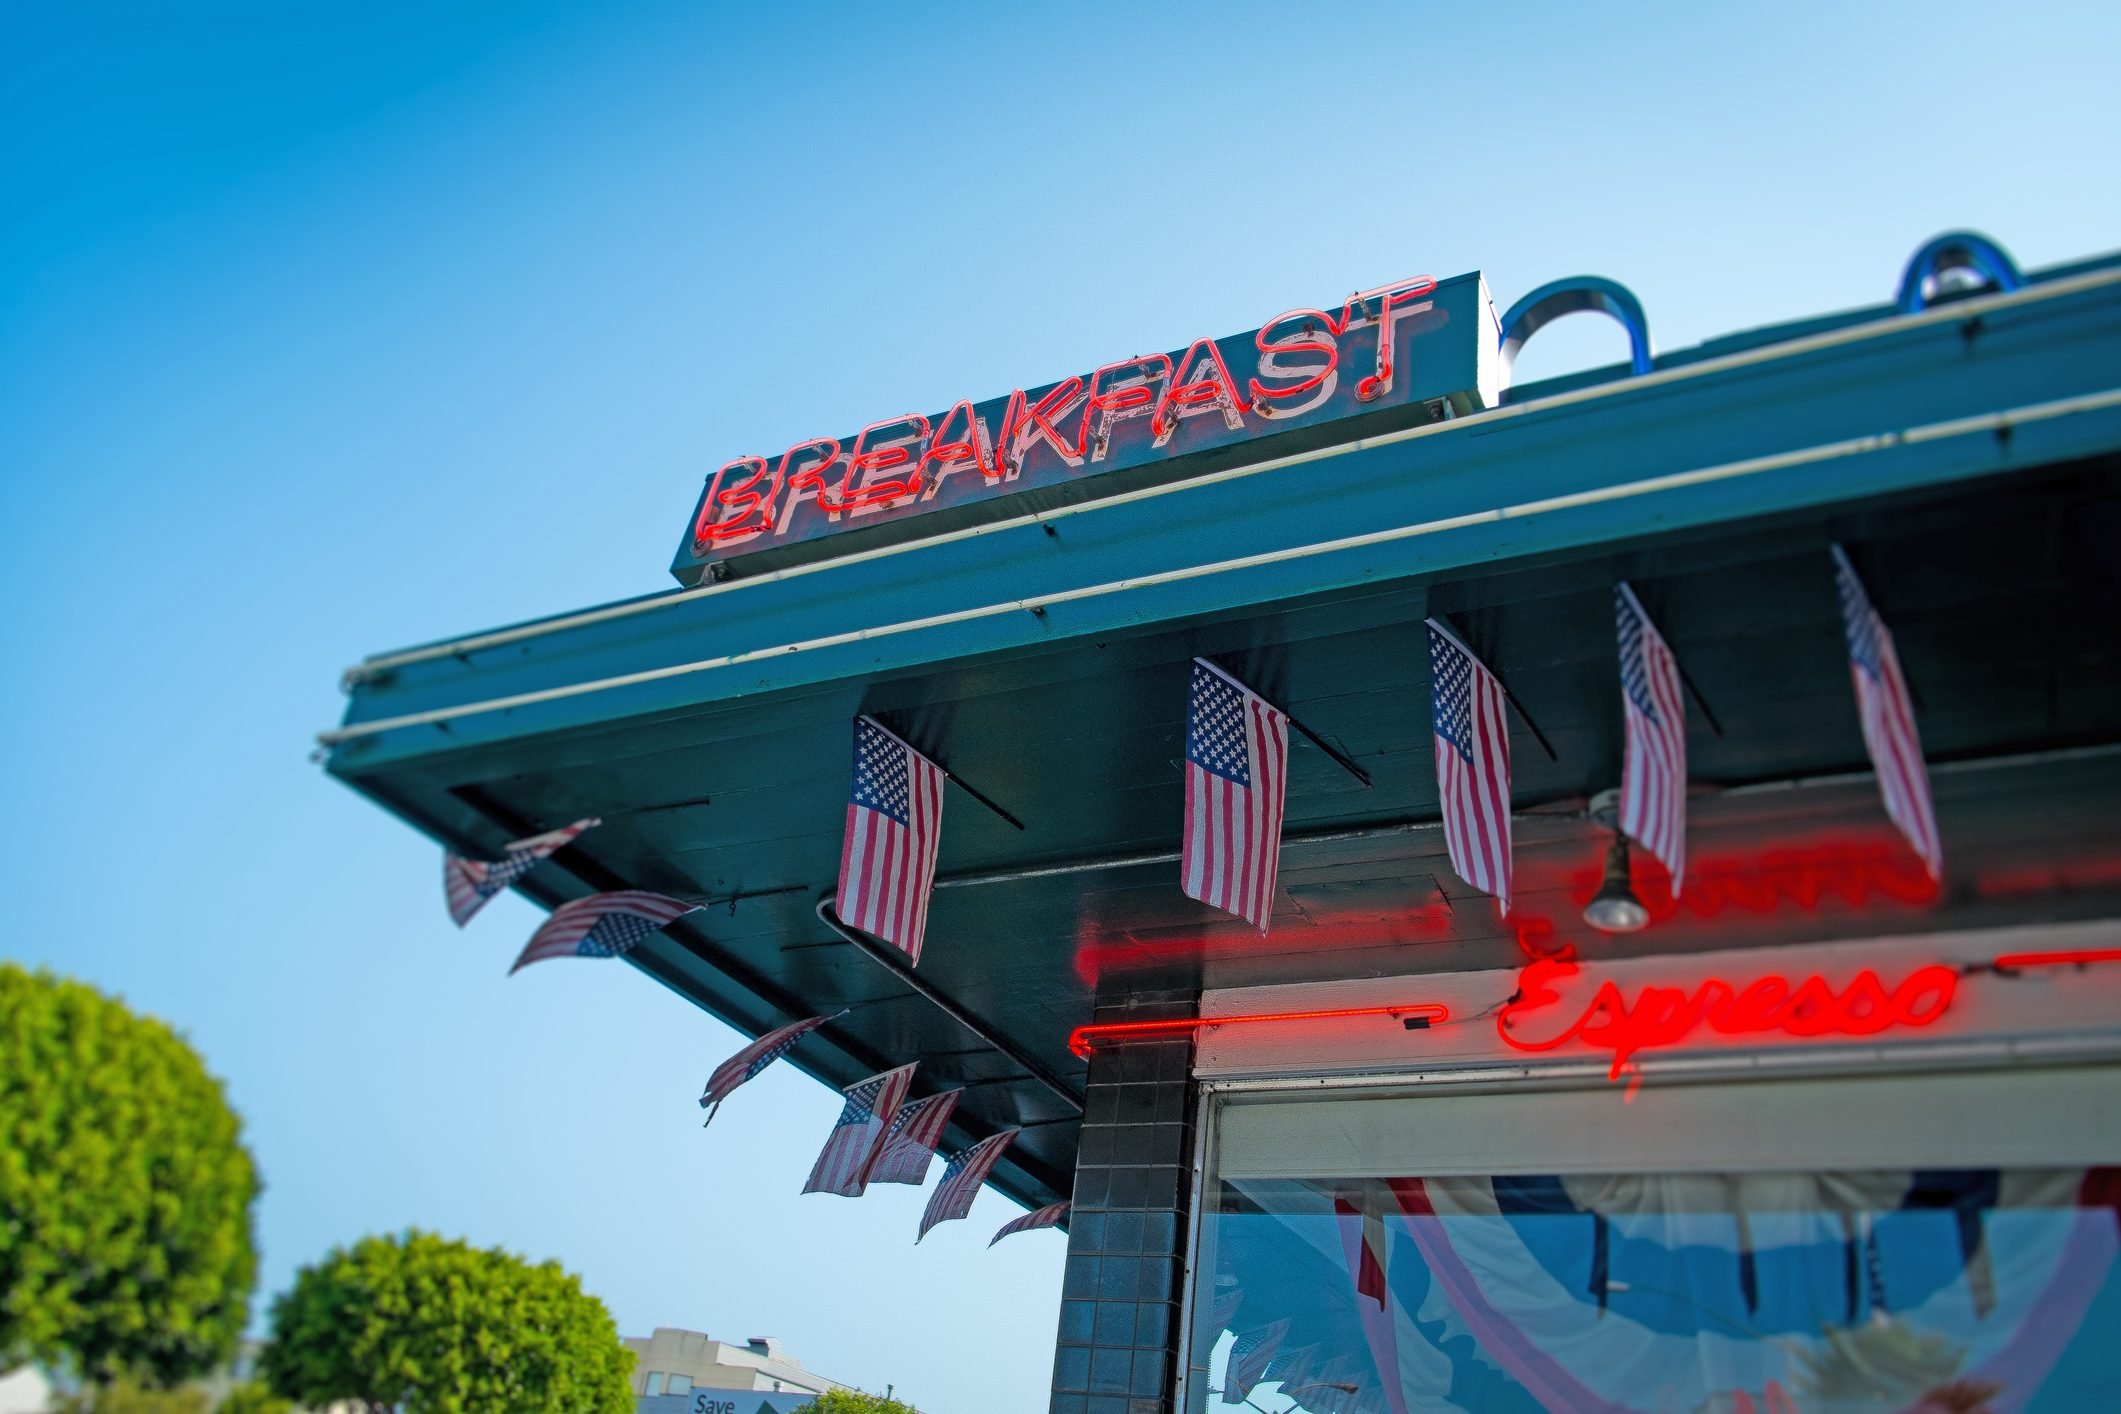 Low angle view of breakfast sign on diner, San Francisco, California, USA